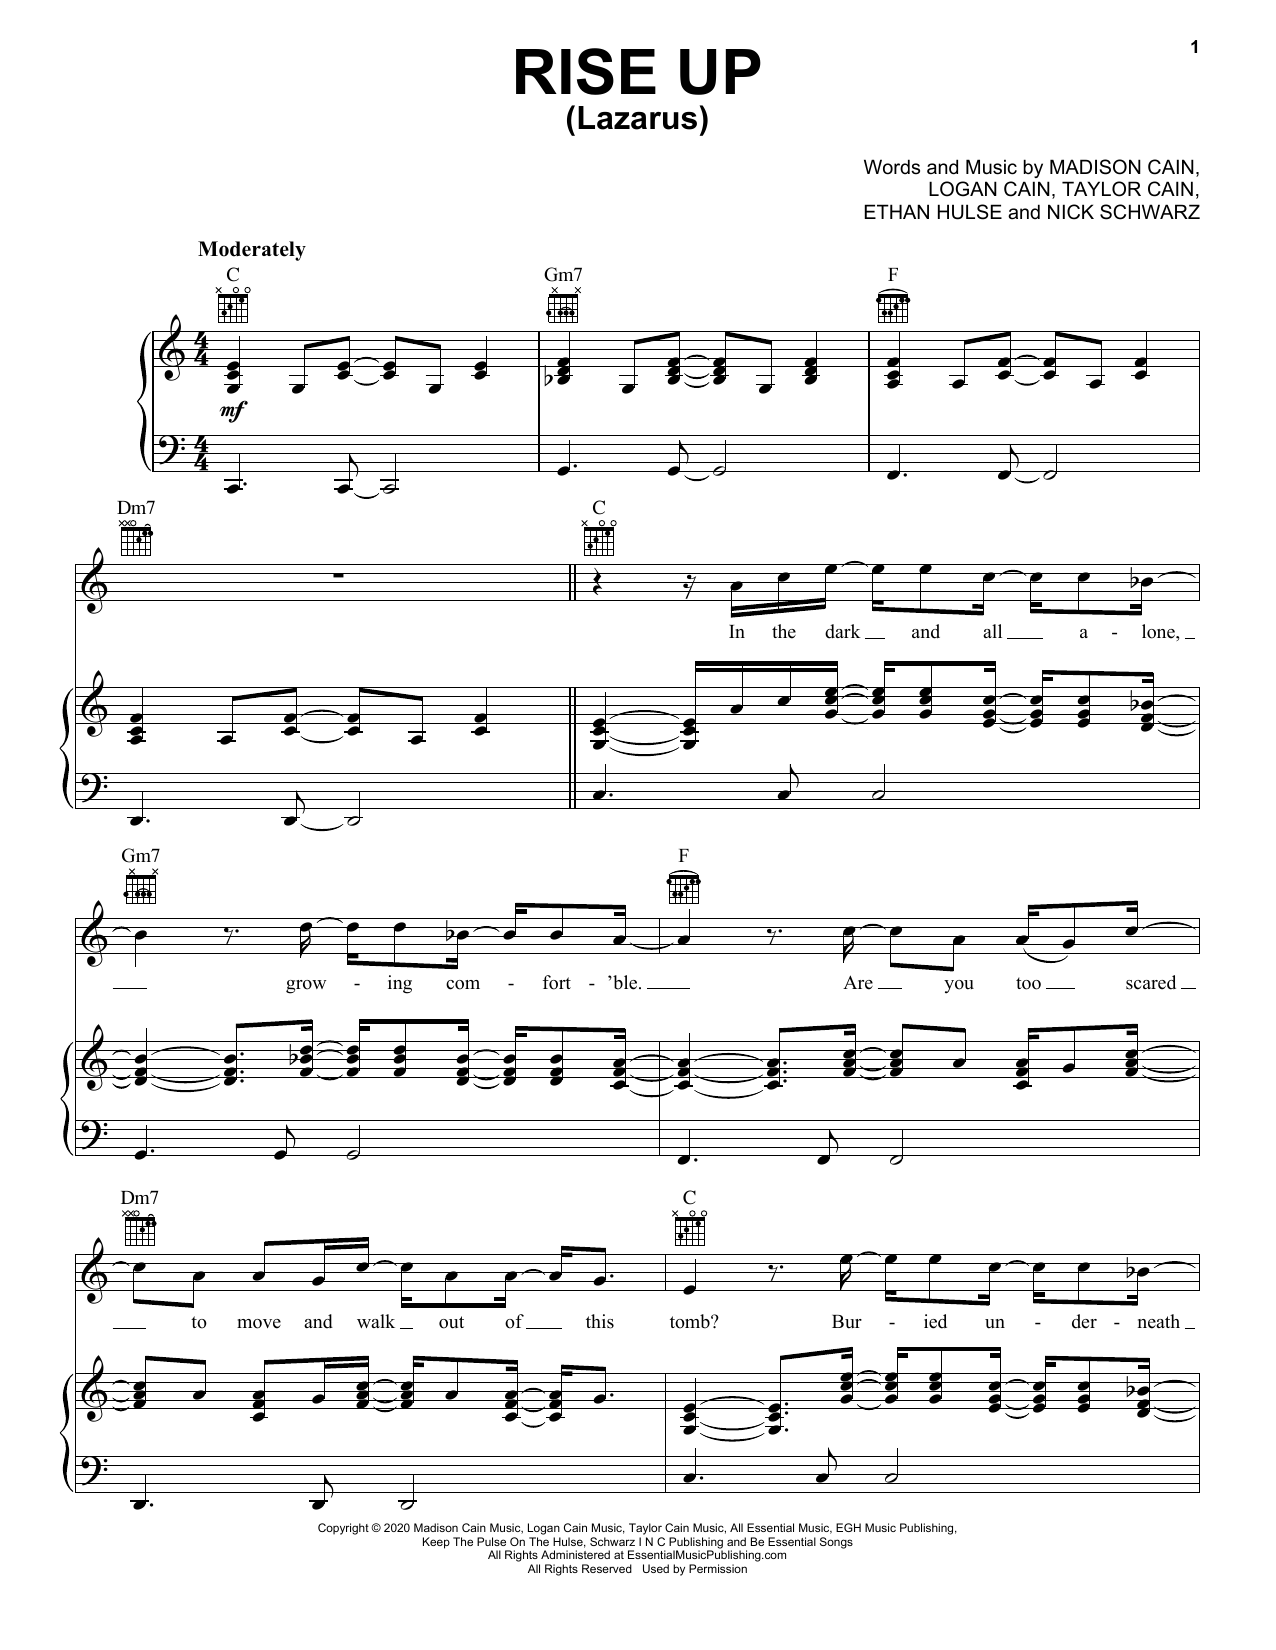 Download CAIN Rise Up (Lazarus) Sheet Music